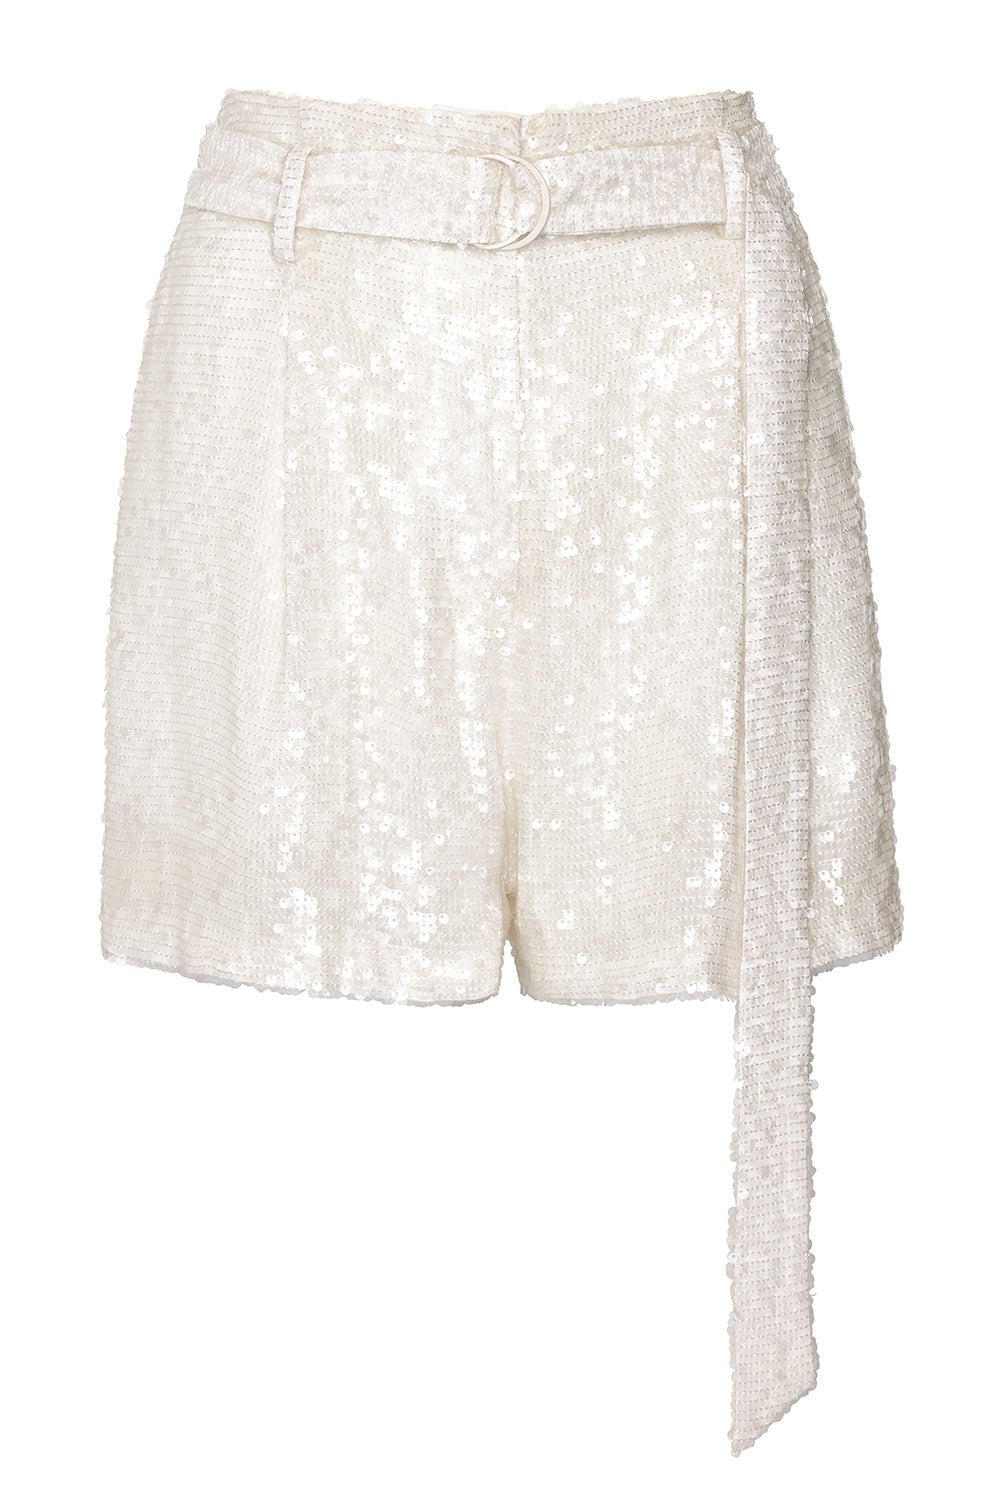 LAPOINTE-Sequin Belted Shorts-